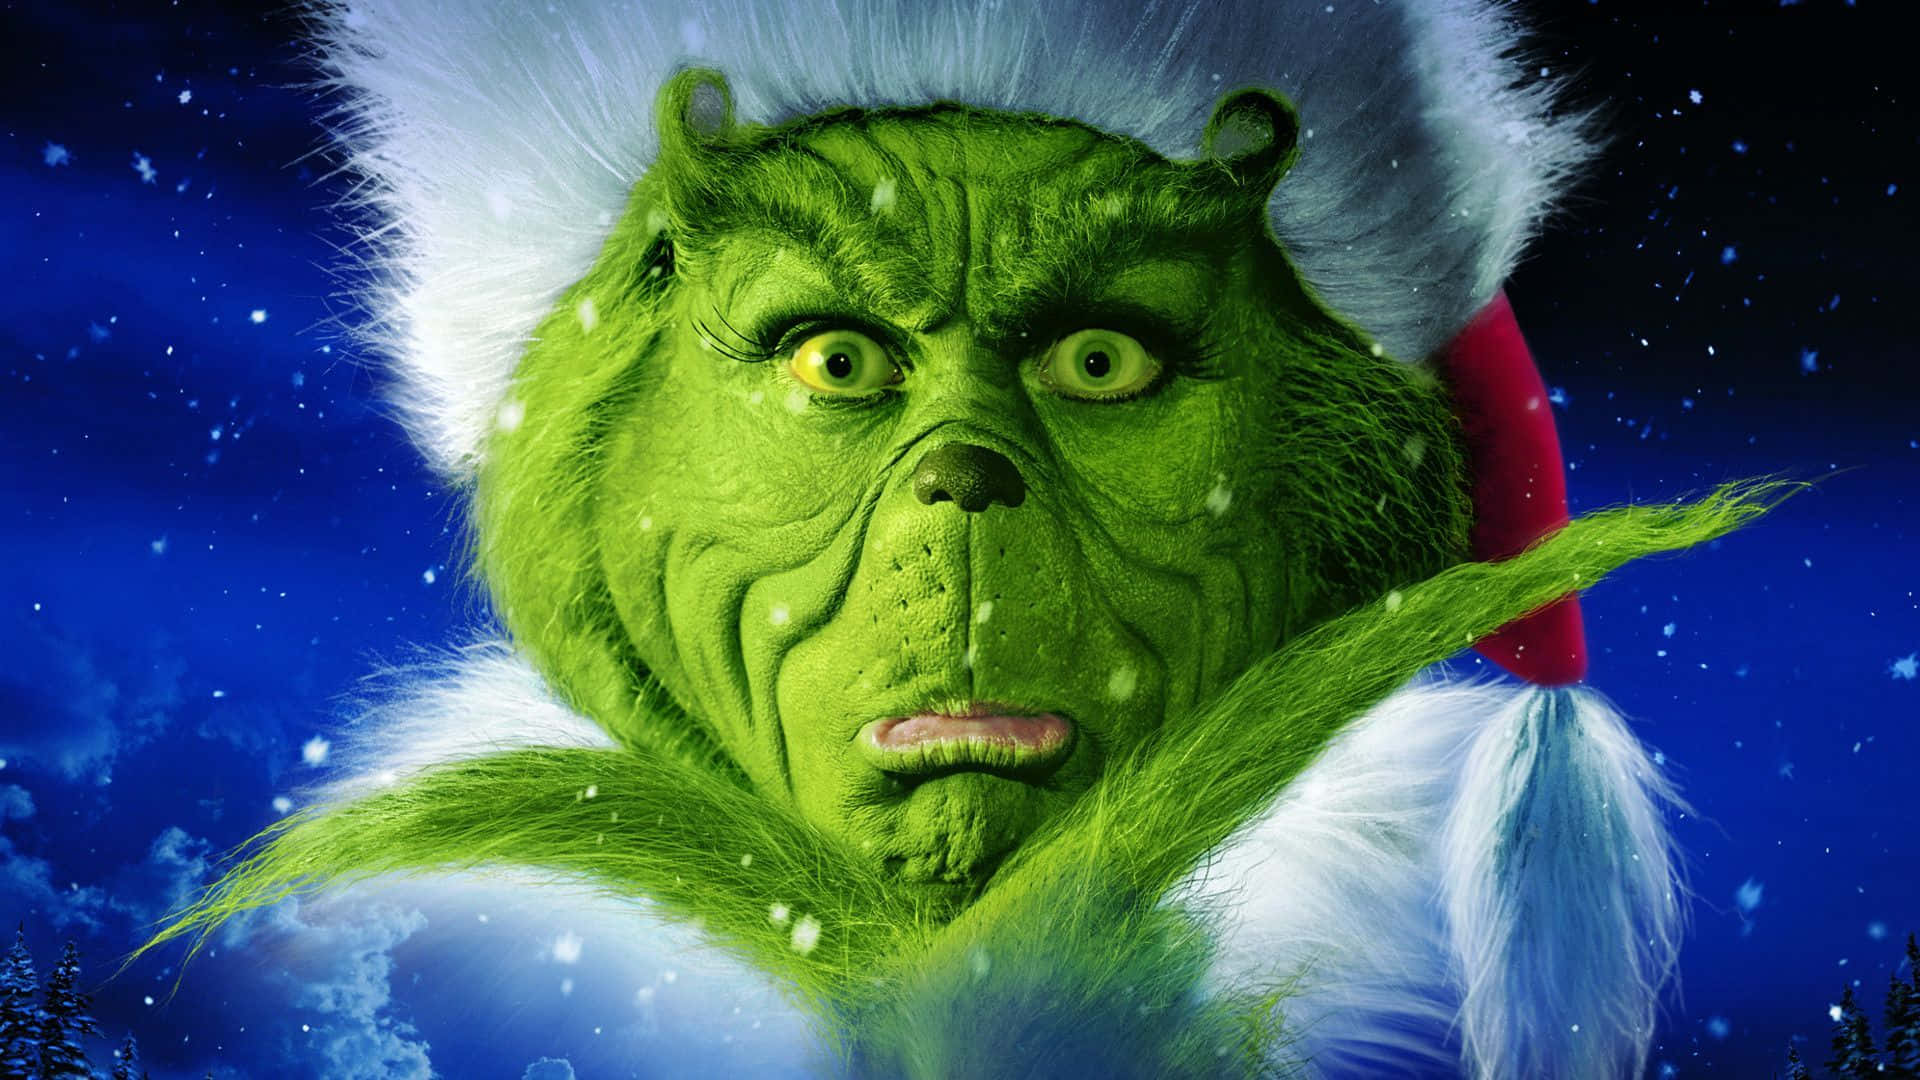 Get into the Christmas spirit with the Grinch! Wallpaper